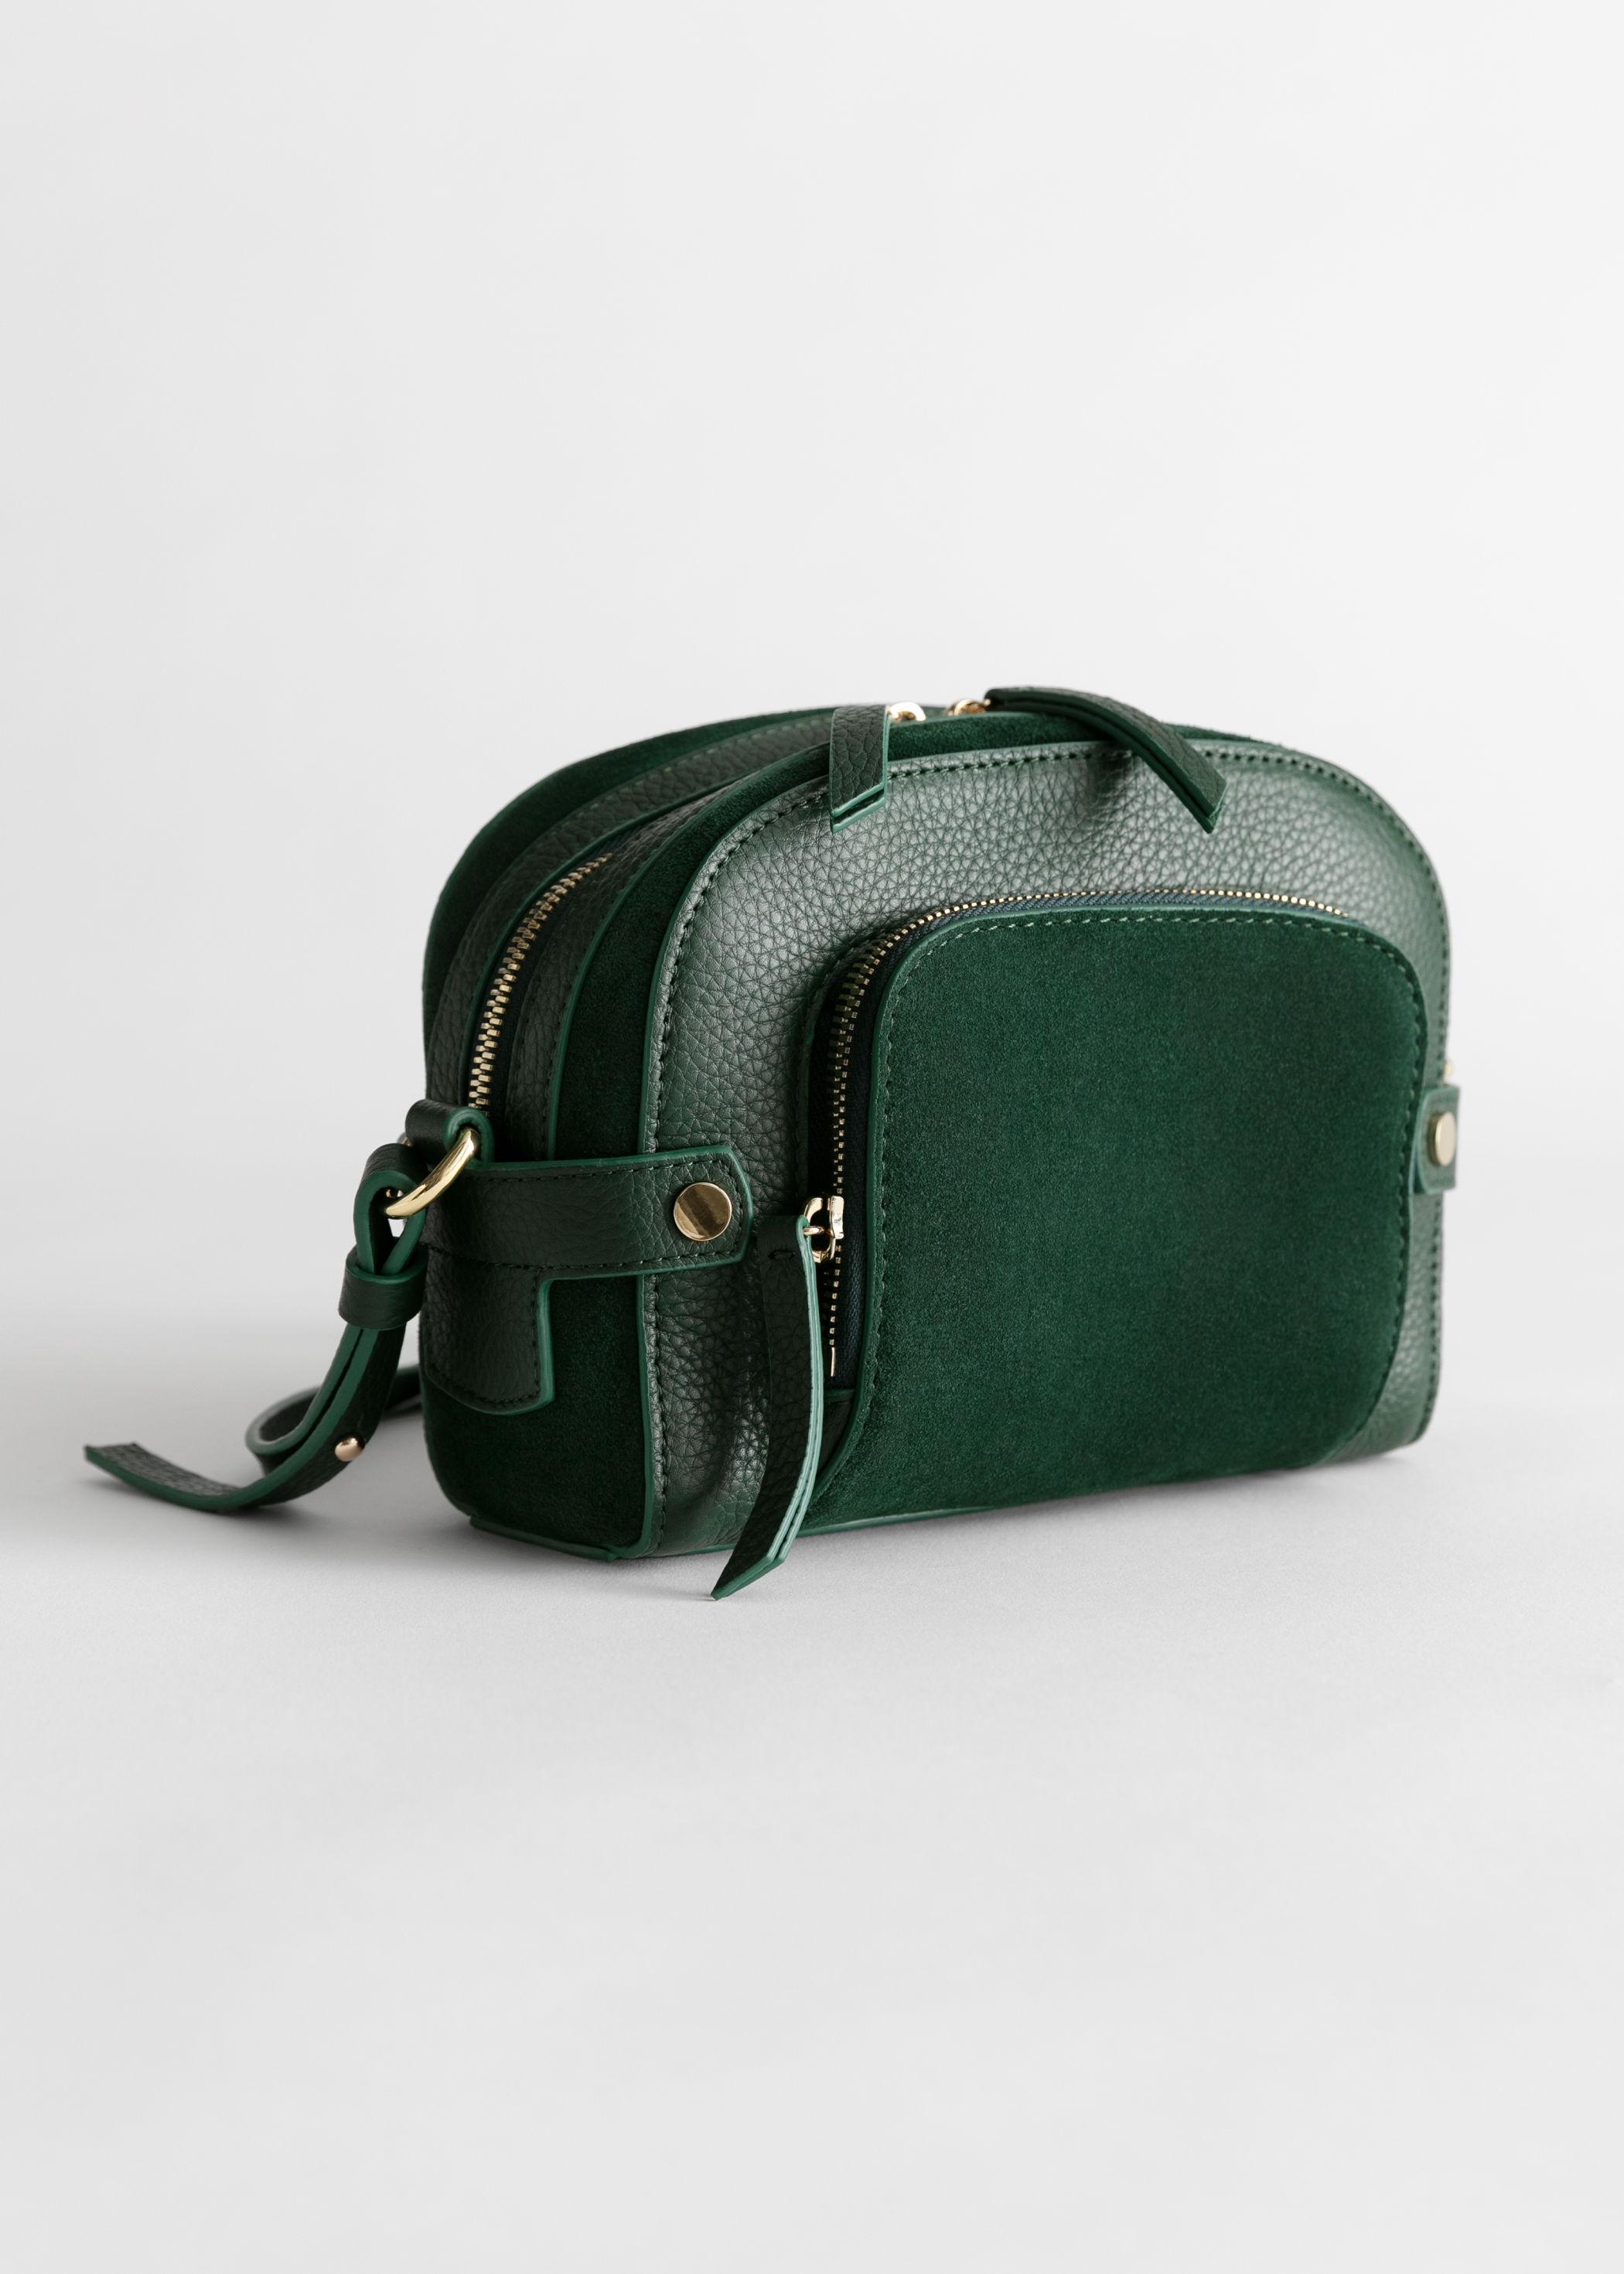 & Other Stories Leather Suede Small Crossbody Bag in Green | Lyst